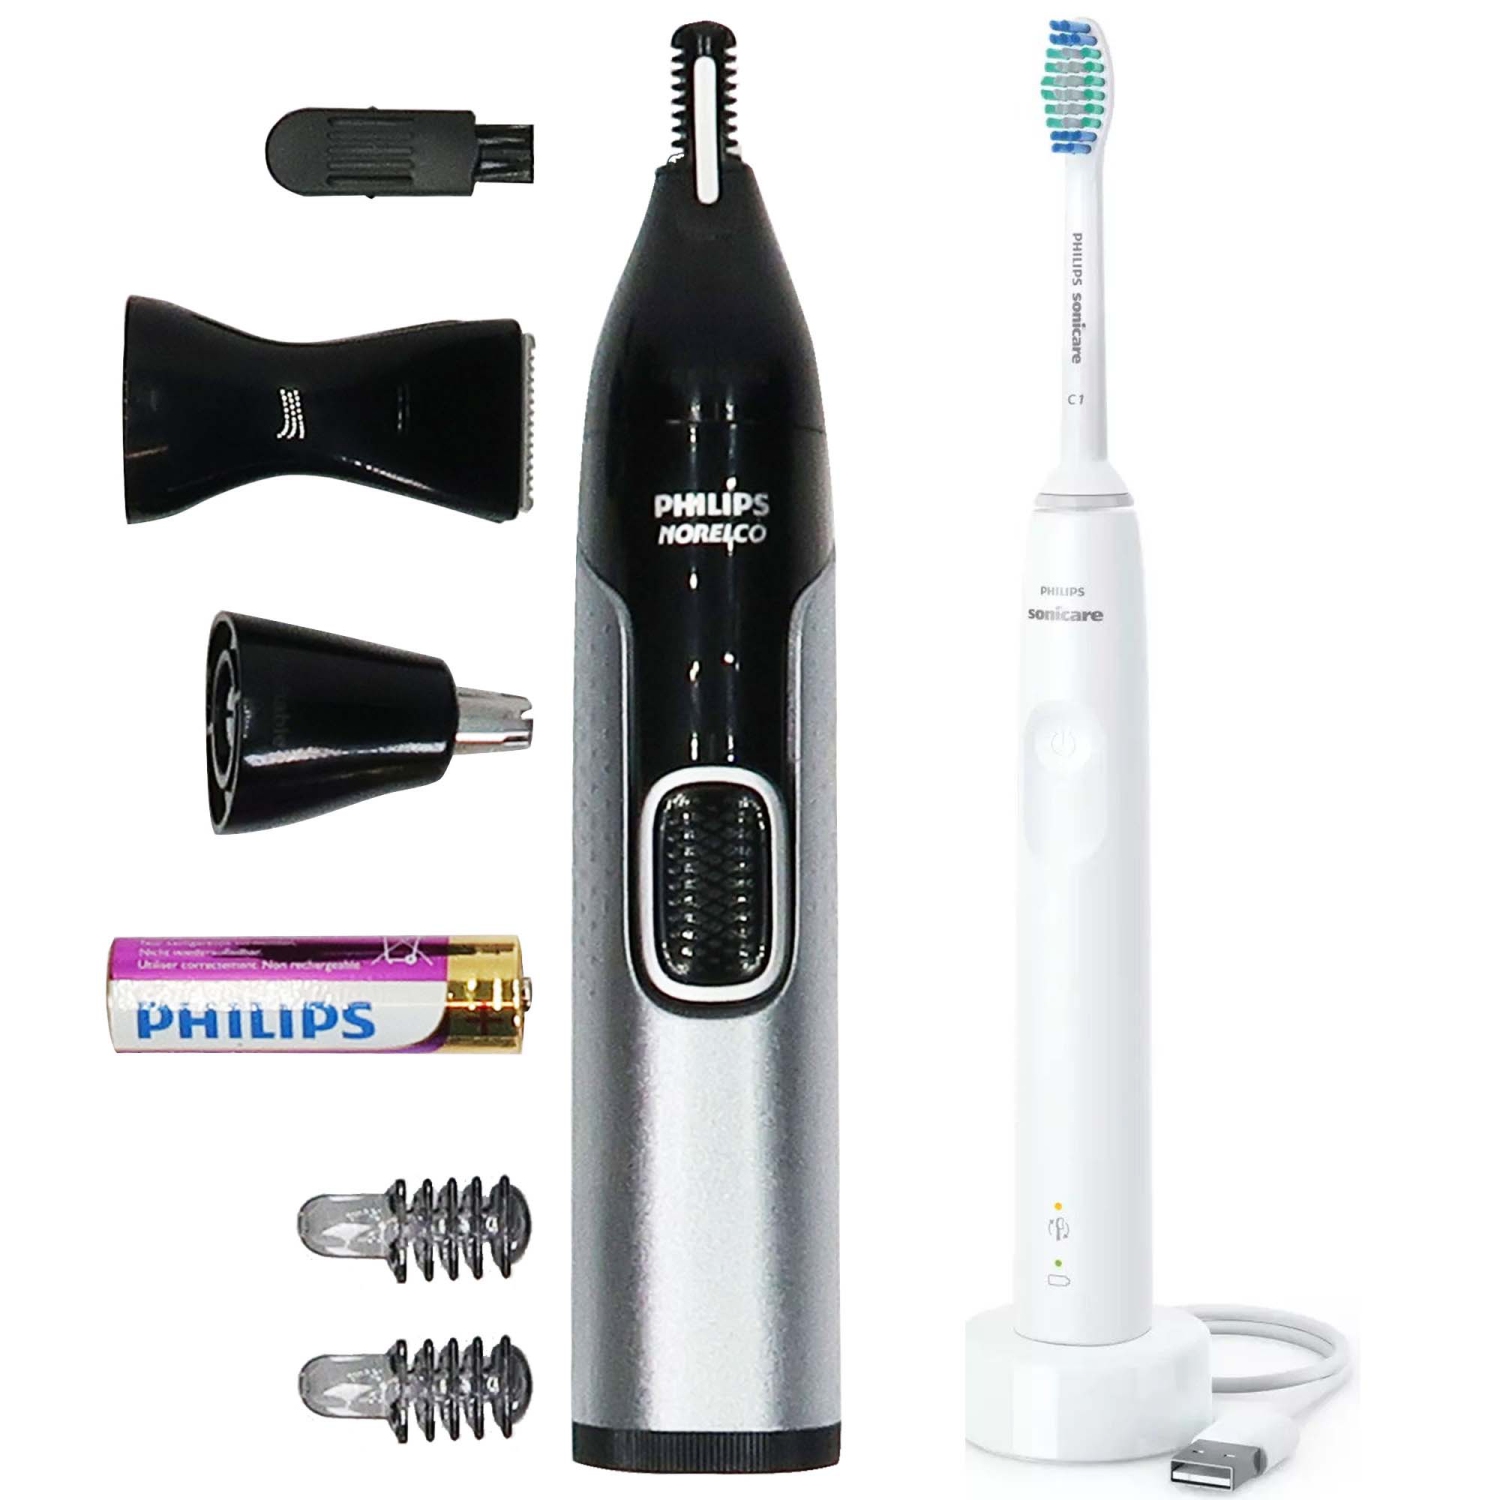 Philips Sonicare Electric Toothbrush HX3681 + Norelco Precision Trimmer Kit 5000